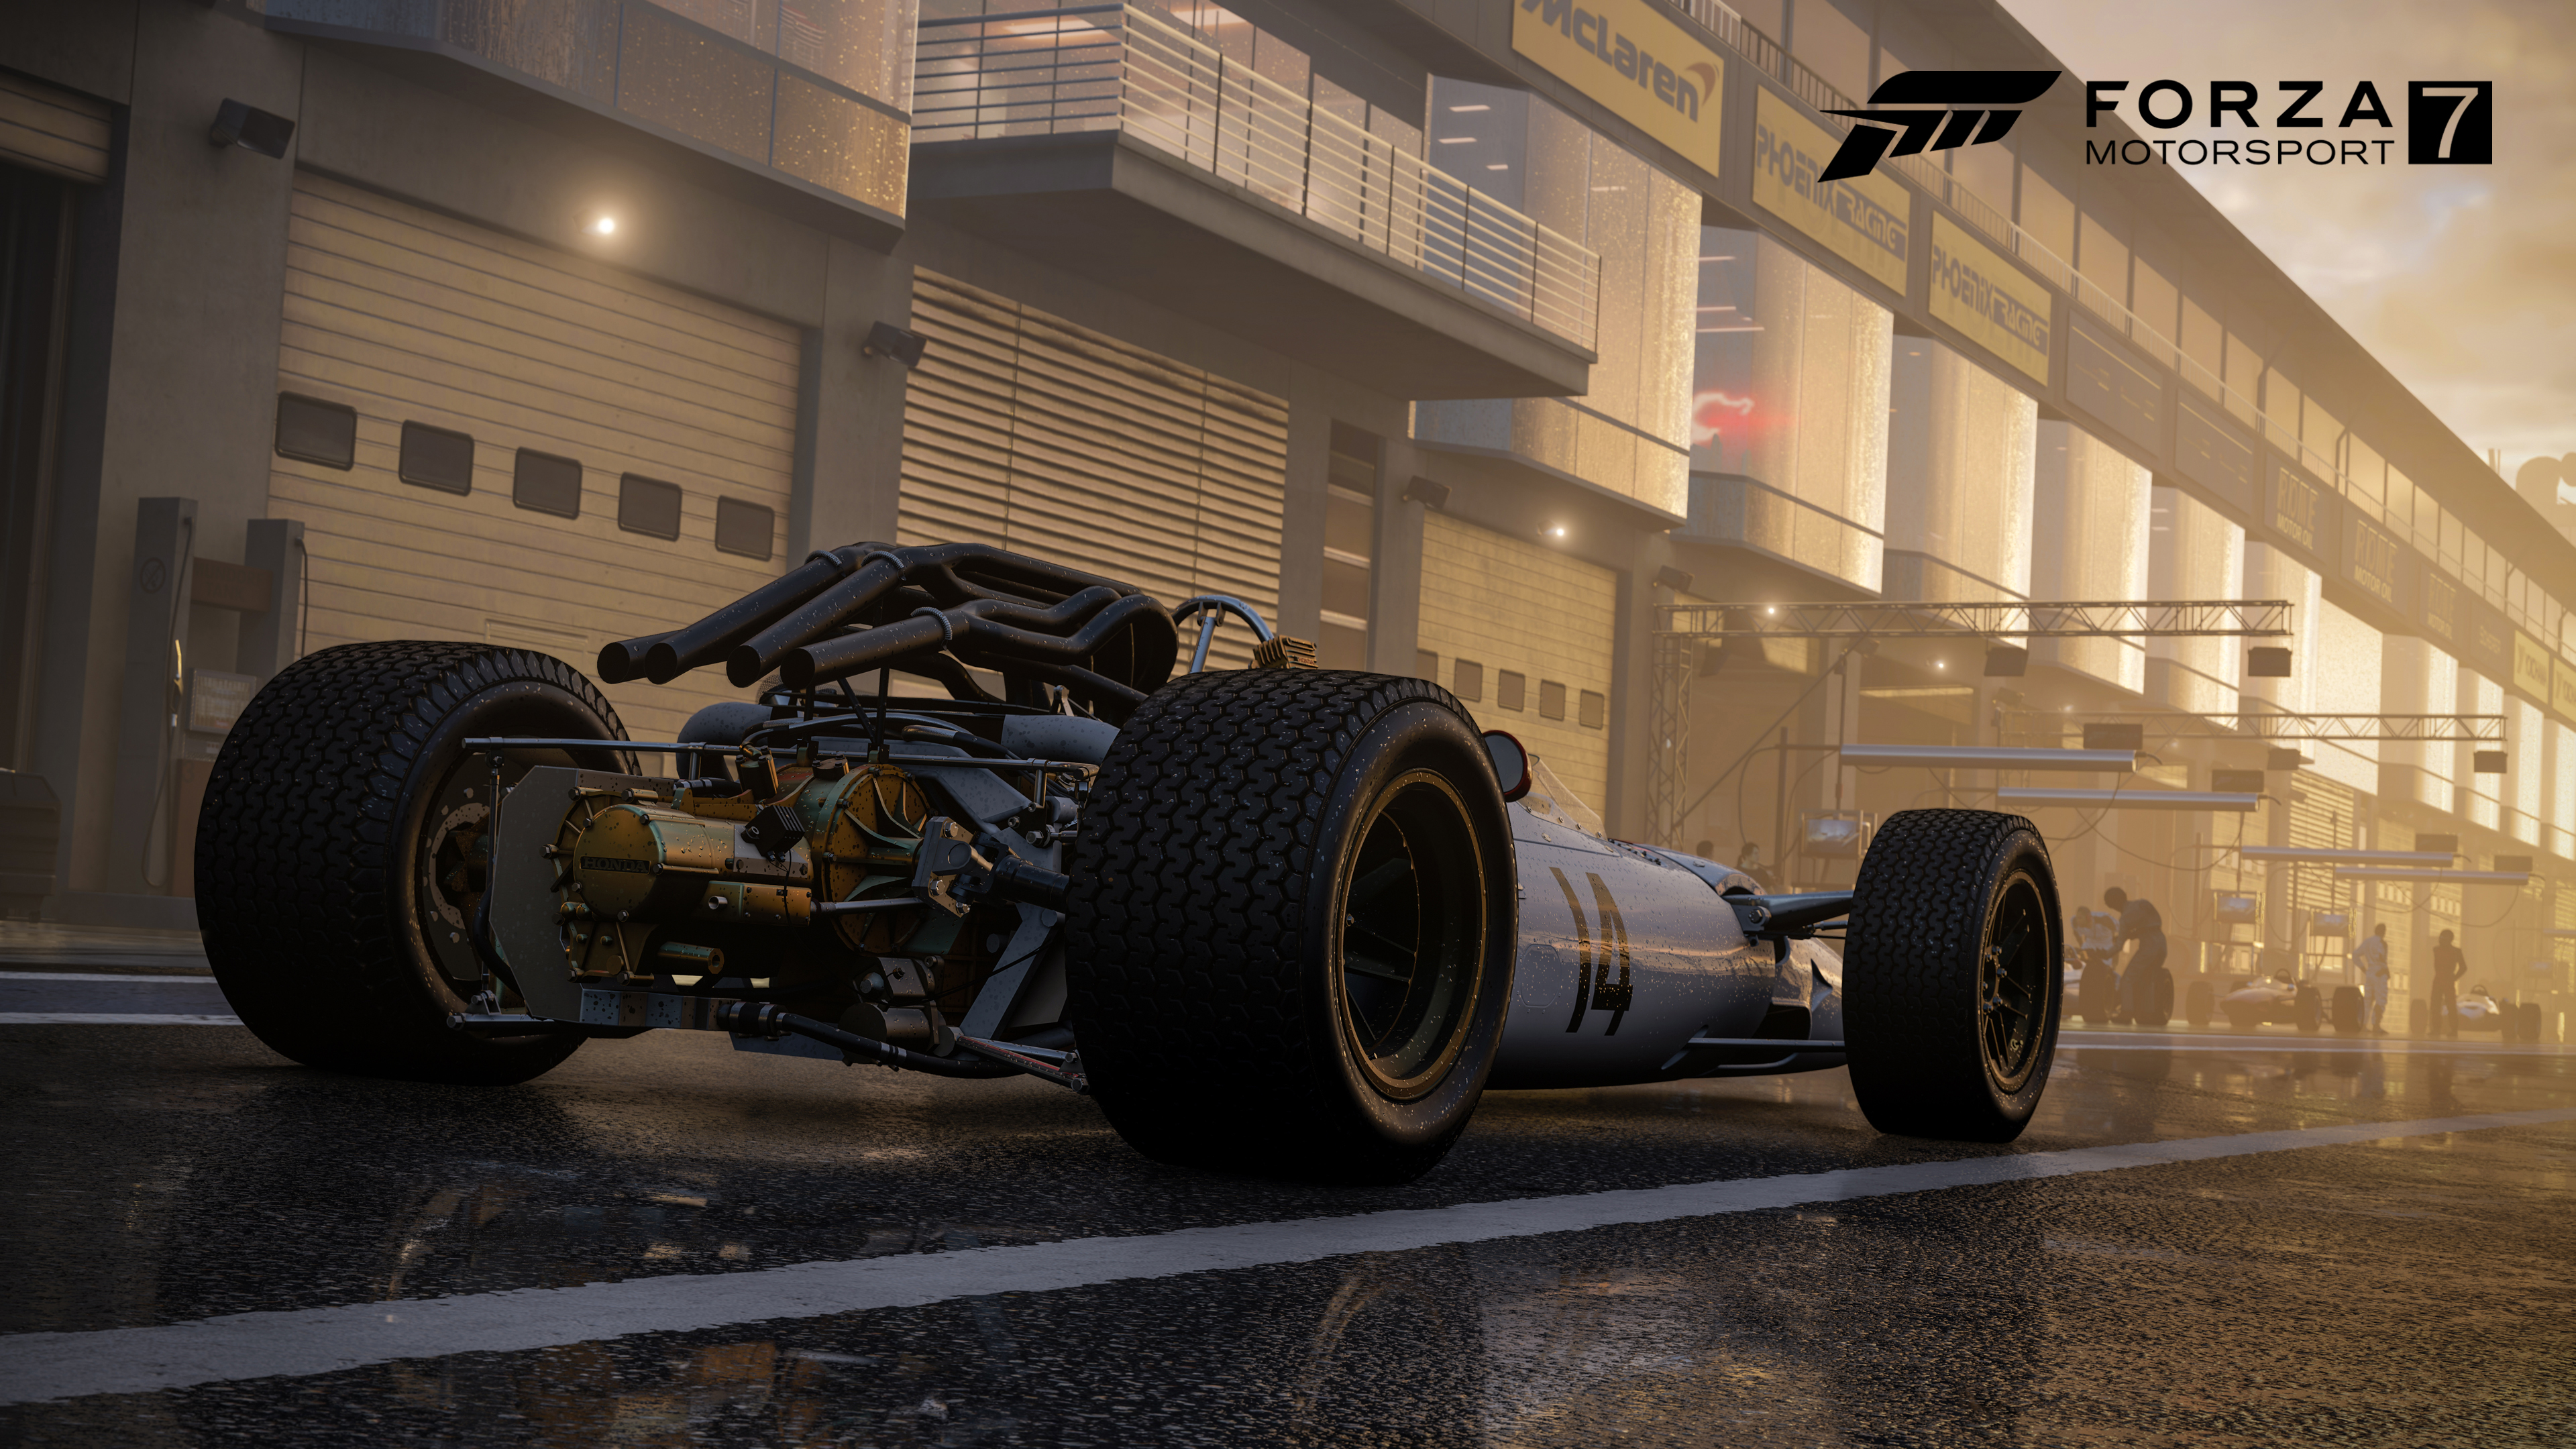 Media asset in full size related to 3dfxzone.it news item entitled as follows: Terminato lo sviluppo del racing game Forza Motorsport 7  in arrivo la demo | Image Name: news26995_Forza-Motorsport-7-Screenshot_3.jpg